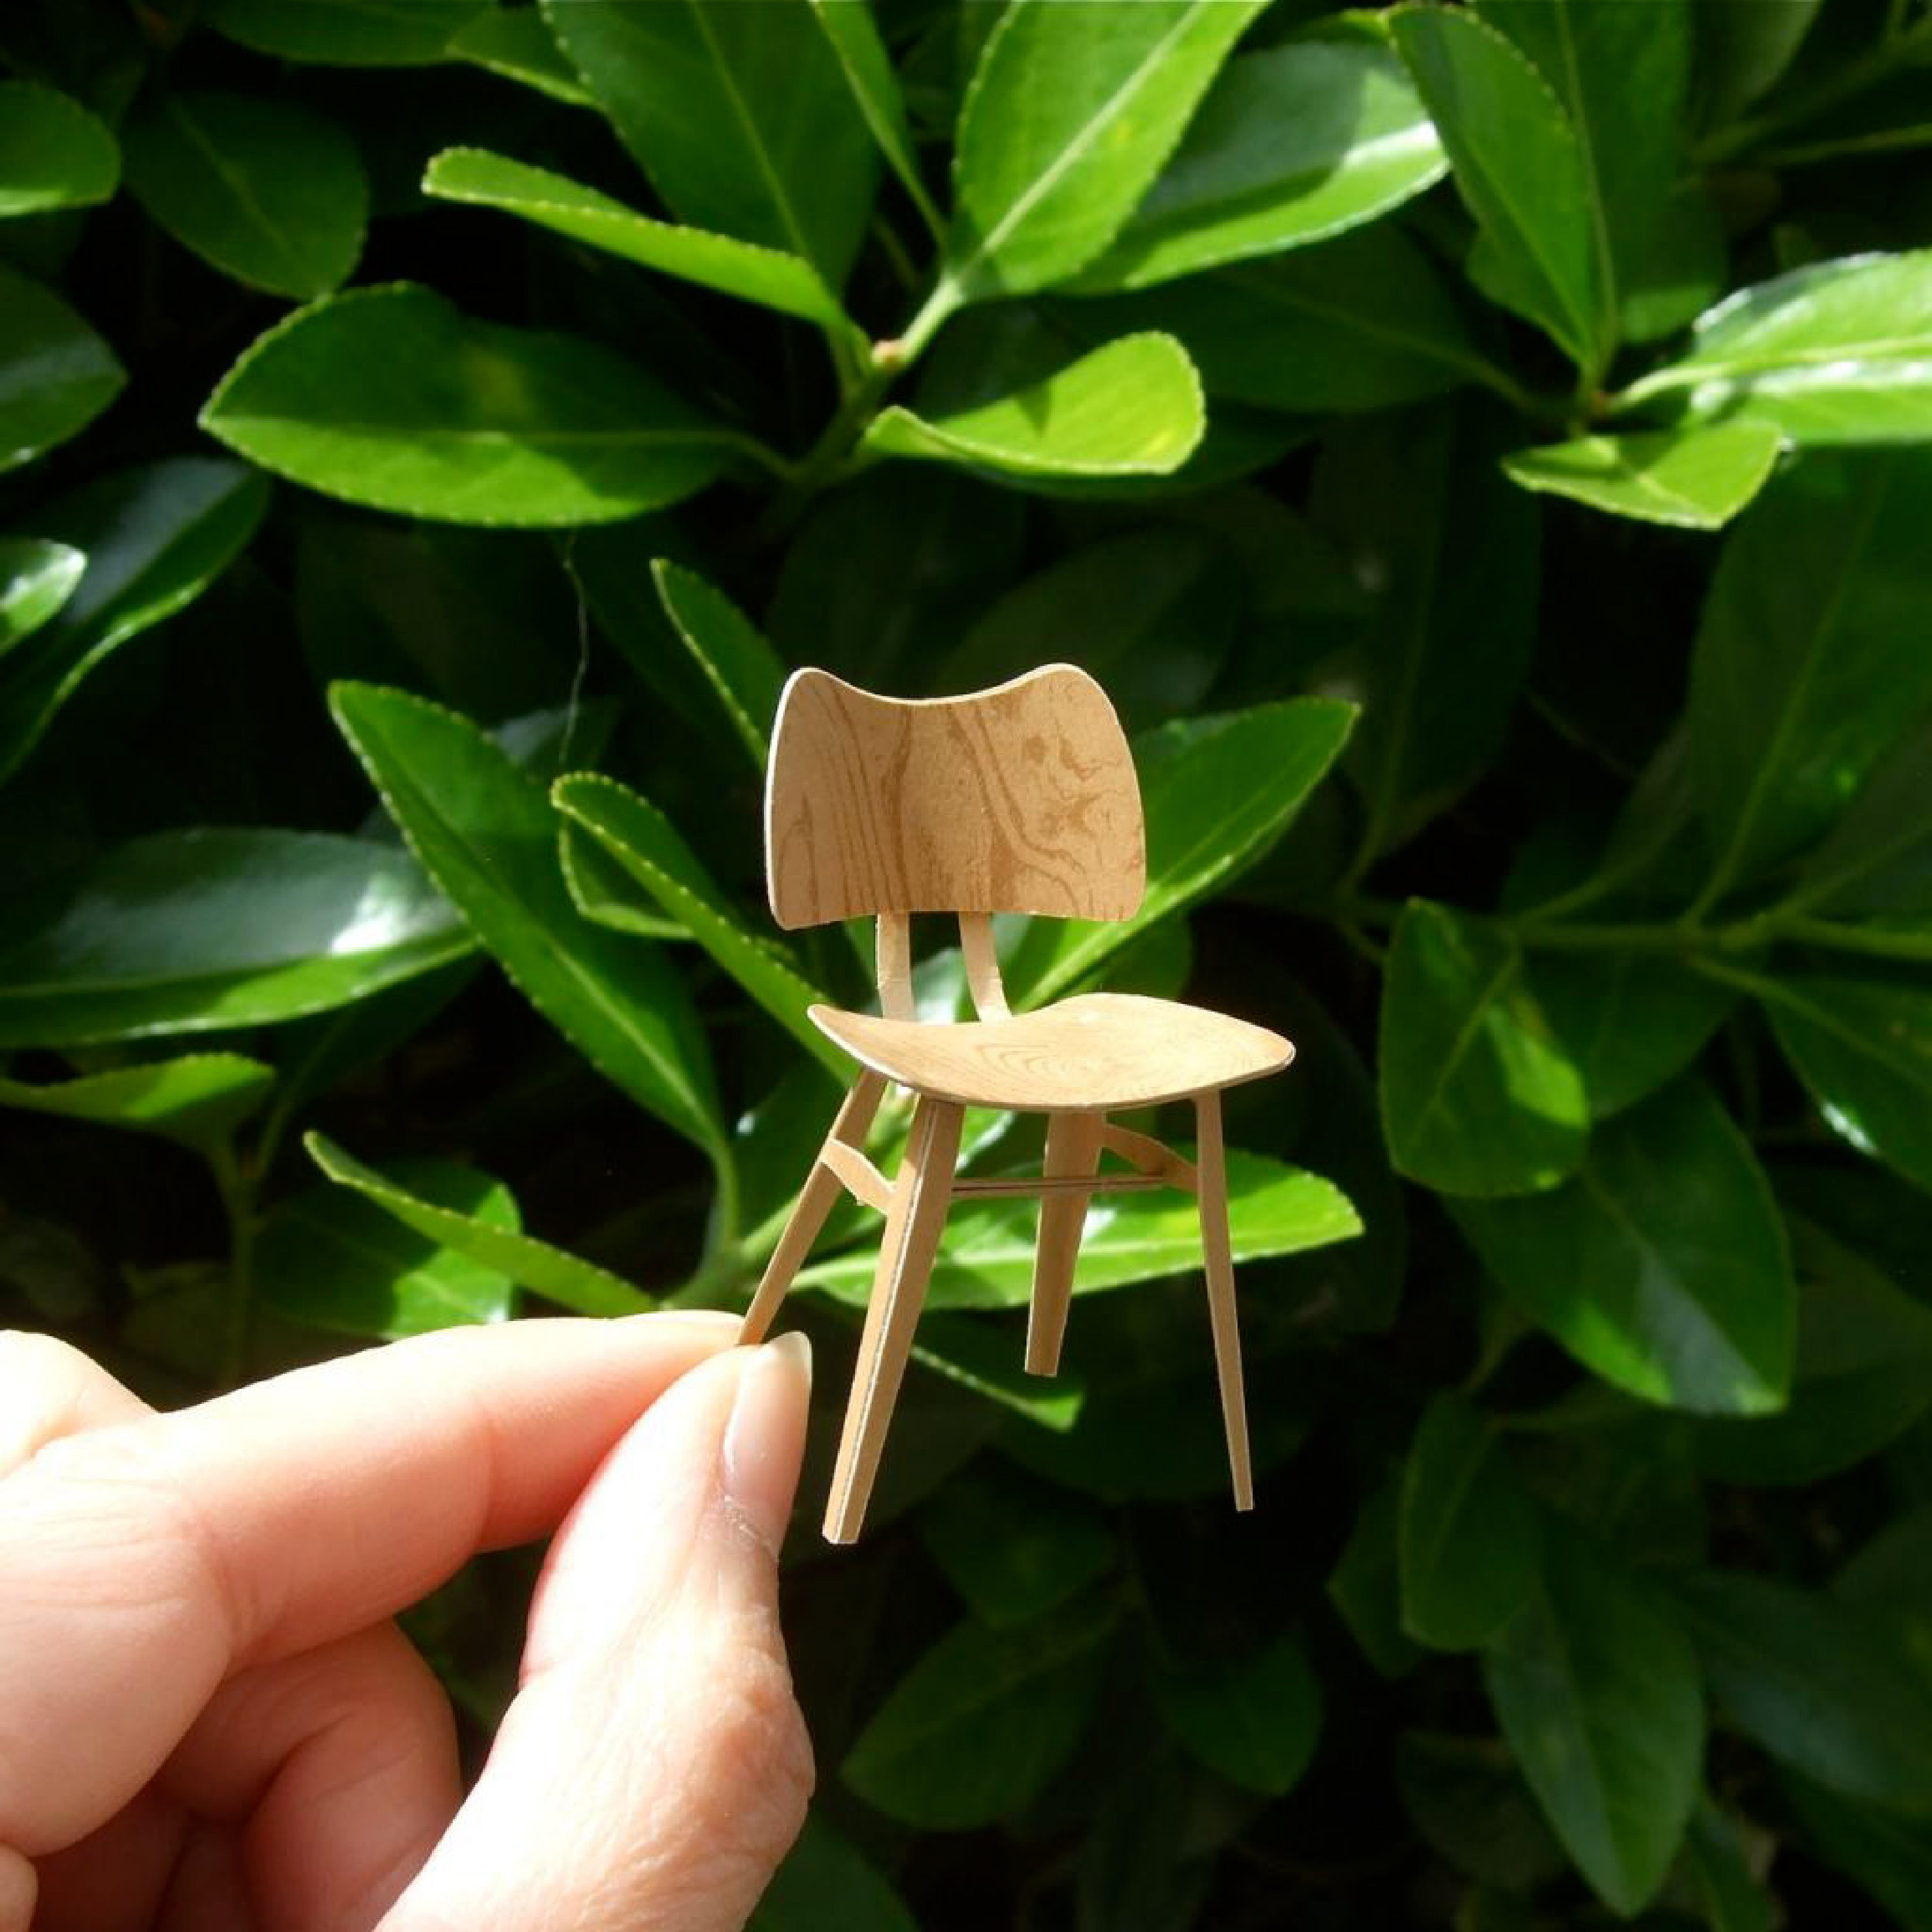 003 Butterfly chair